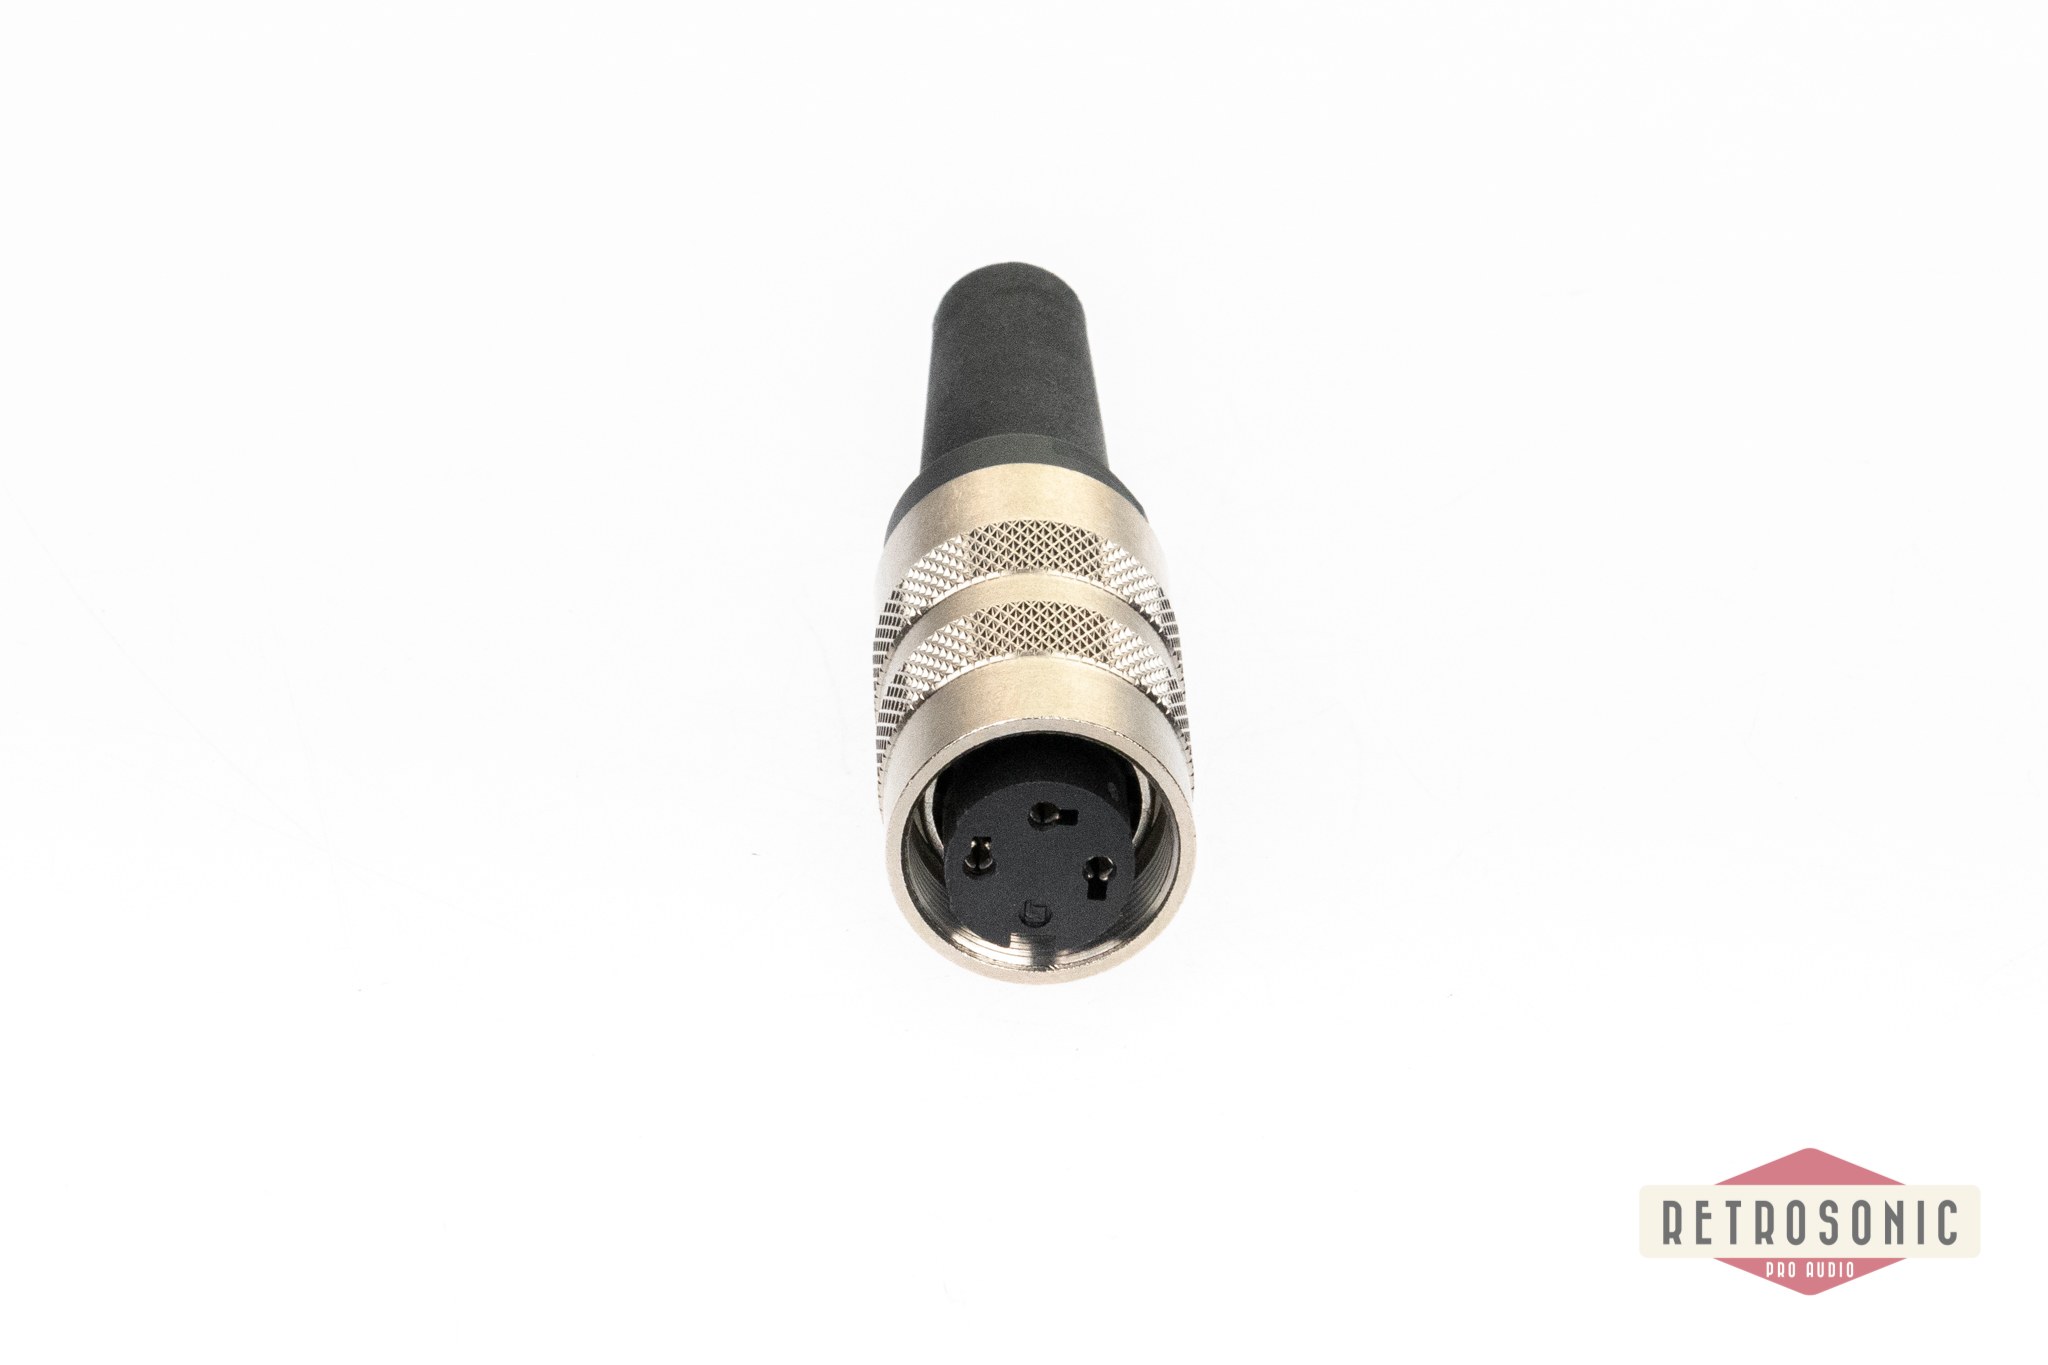 Binder 3-pin female cable connector w. thread